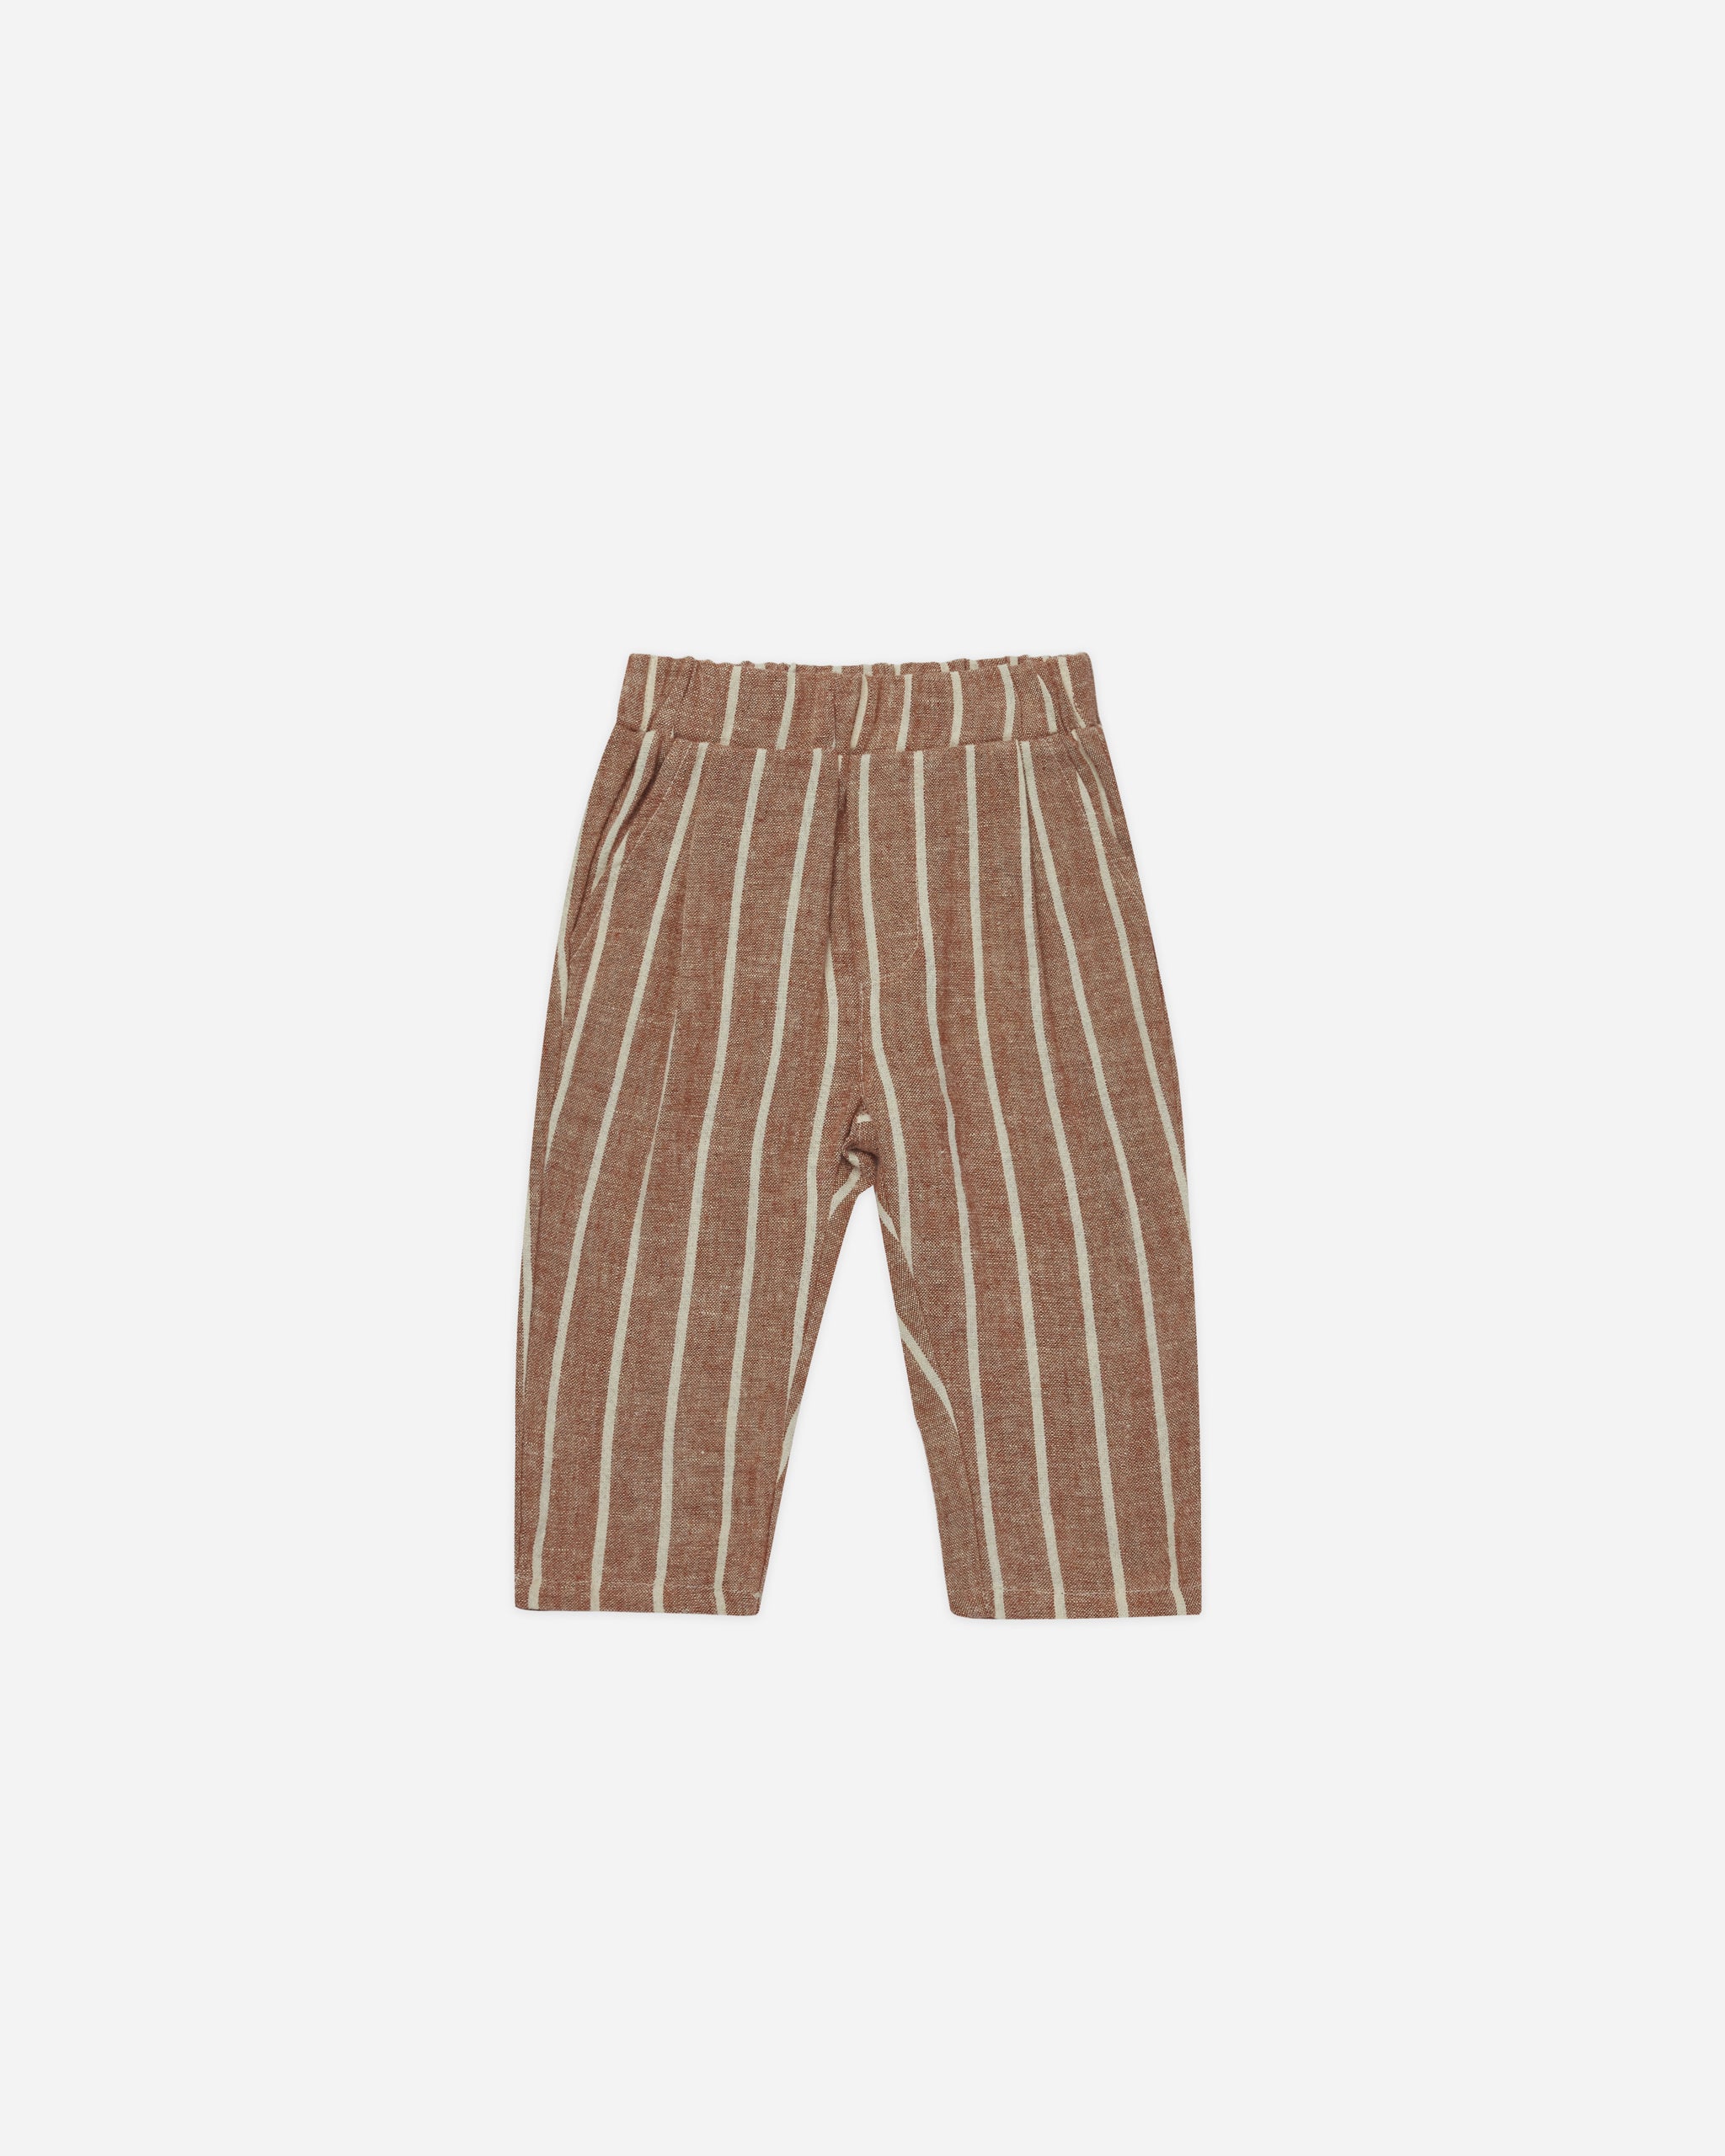 Otis Pant || Cedar Pinstripe - Rylee + Cru | Kids Clothes | Trendy Baby Clothes | Modern Infant Outfits |